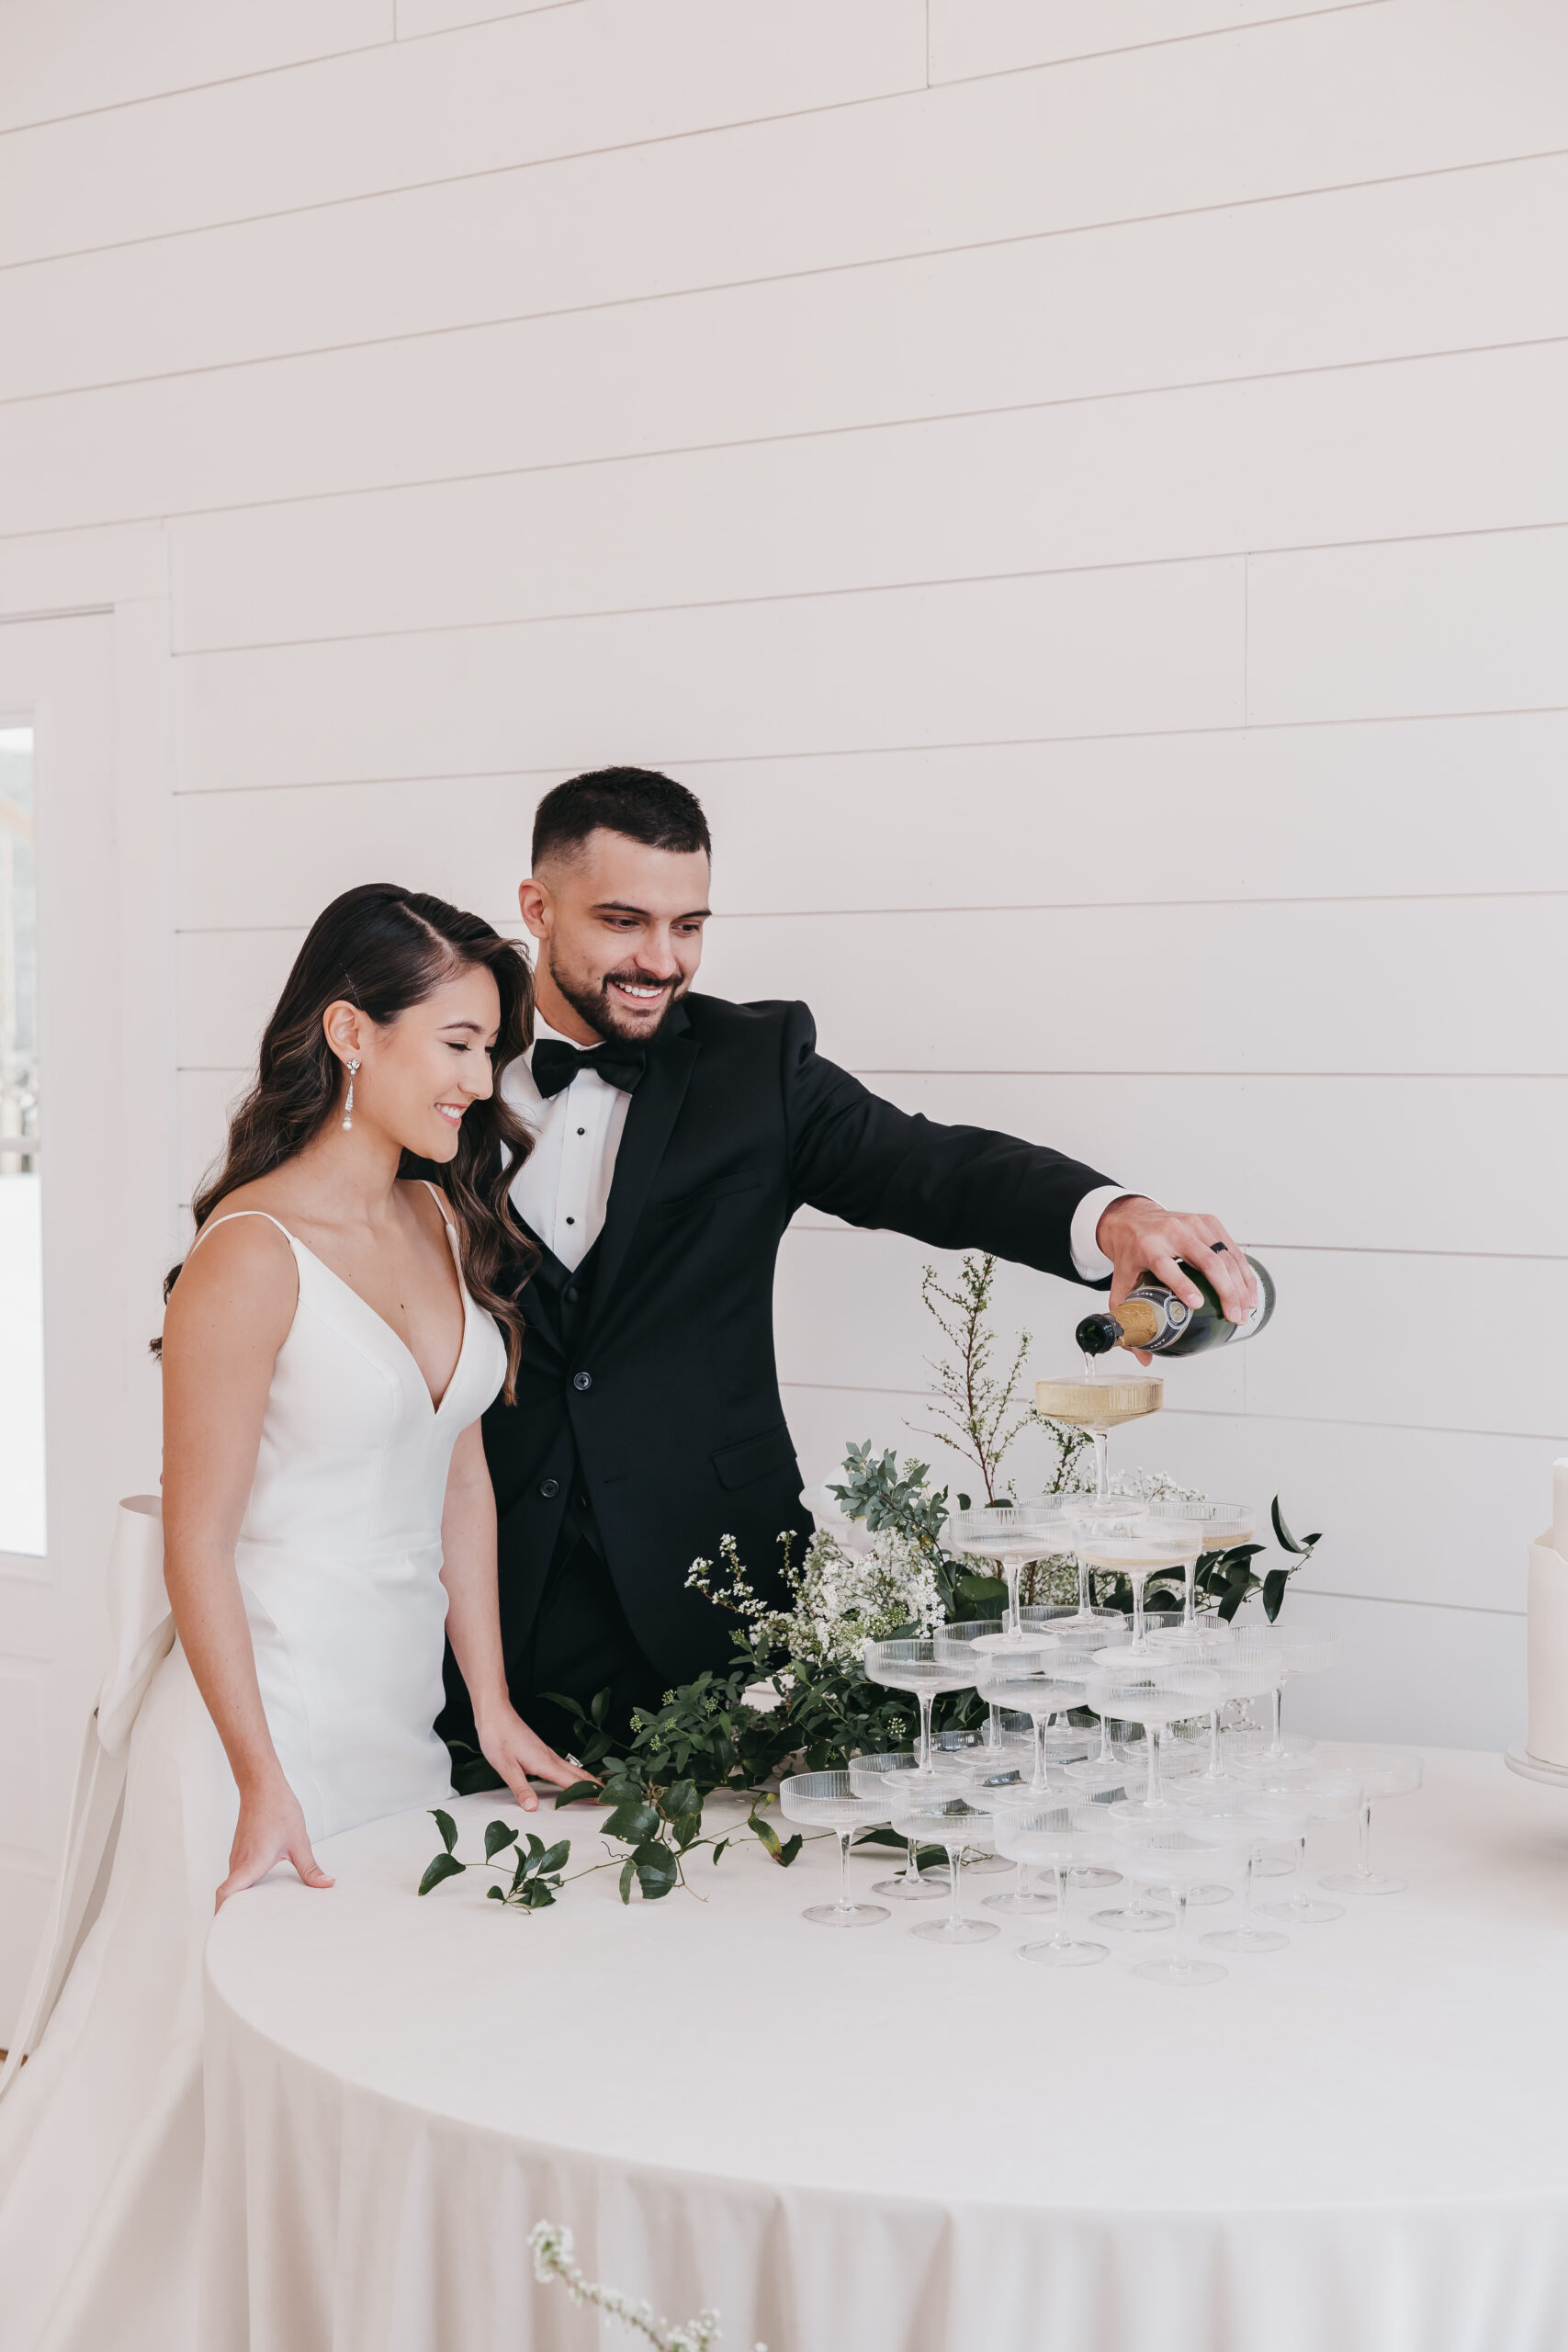 Couple pouring champagne over glasses stacked together, shot by fine art wedding photographer Rachel Yearick